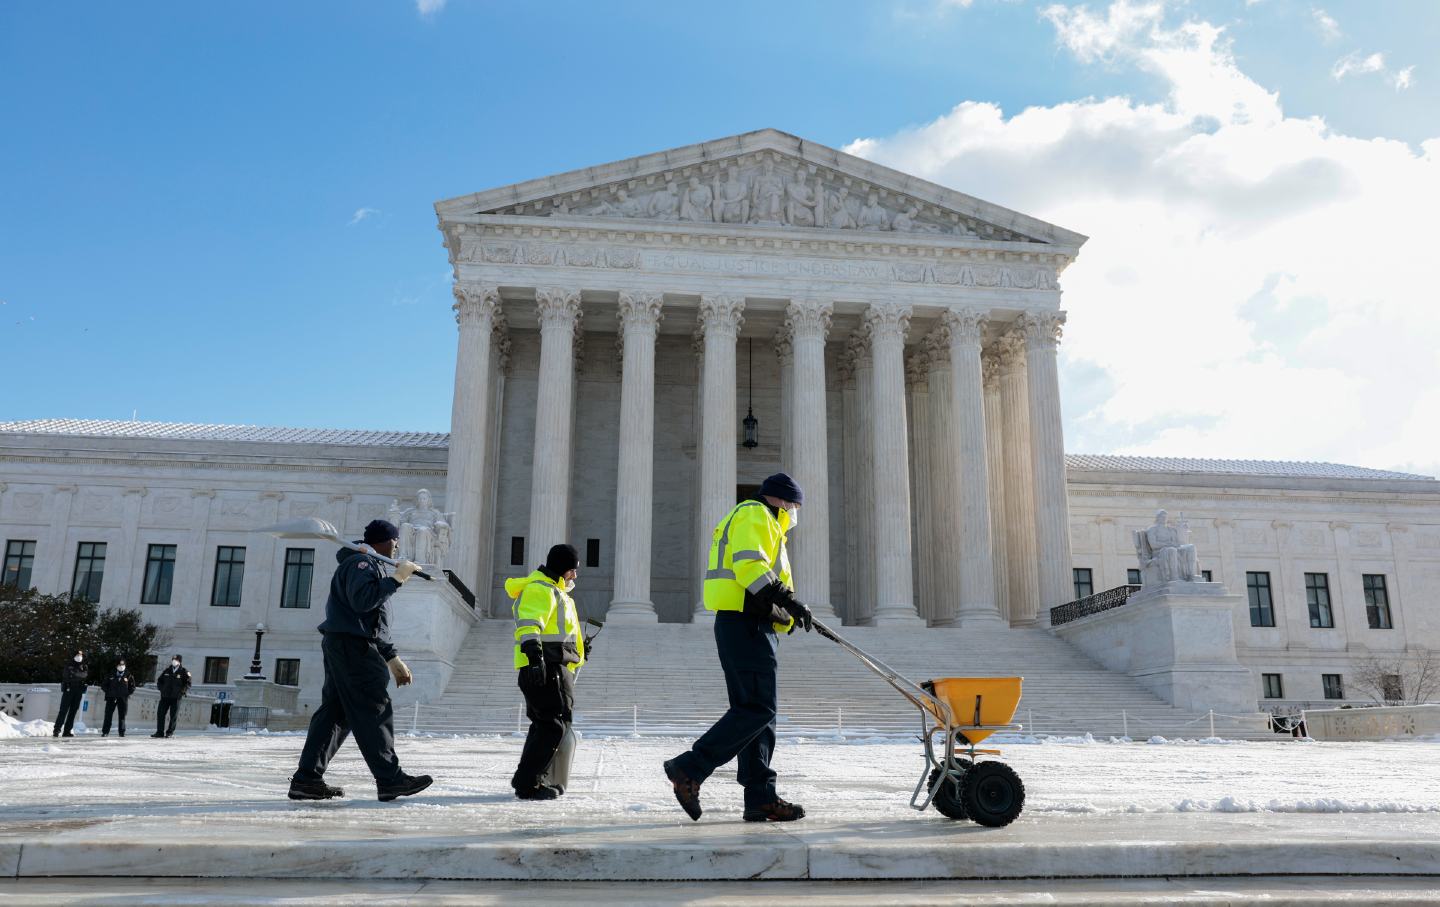 Why Doesn’t the Supreme Court Want Workers to Be As Safe From Covid as They Are?